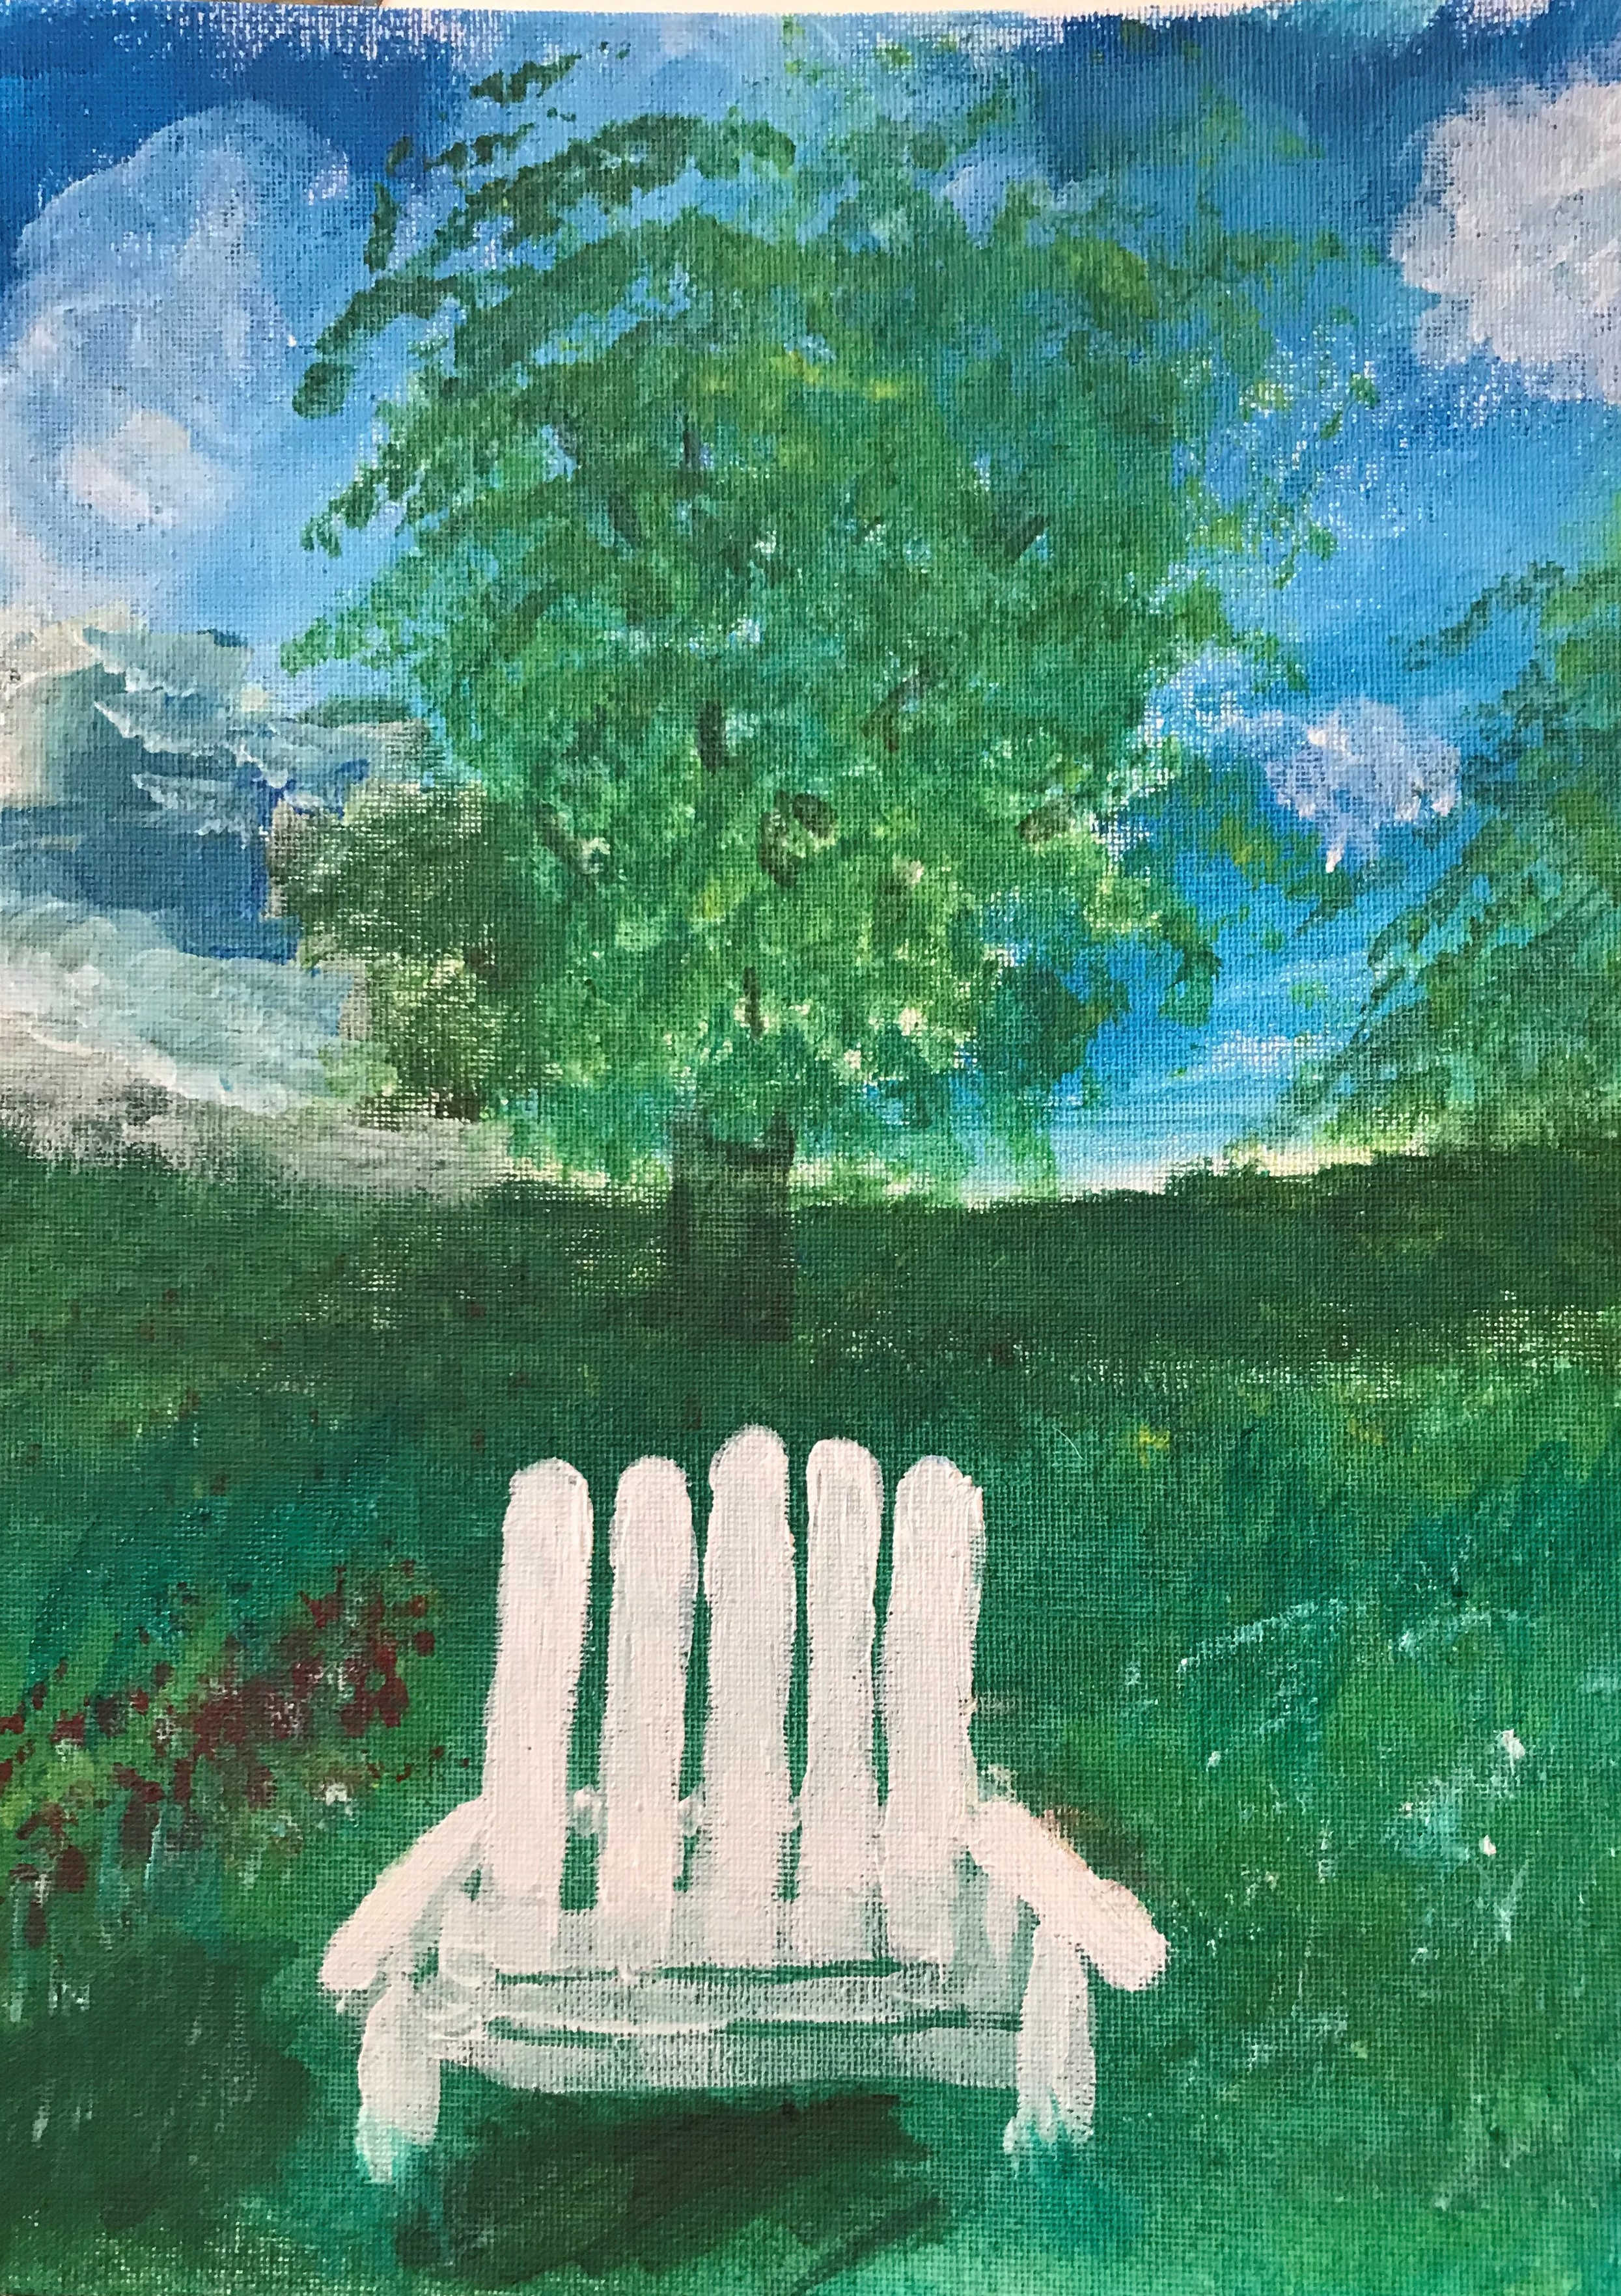 'The big chair in St Andrew’s Botanic Gardens' by Betty Kenny